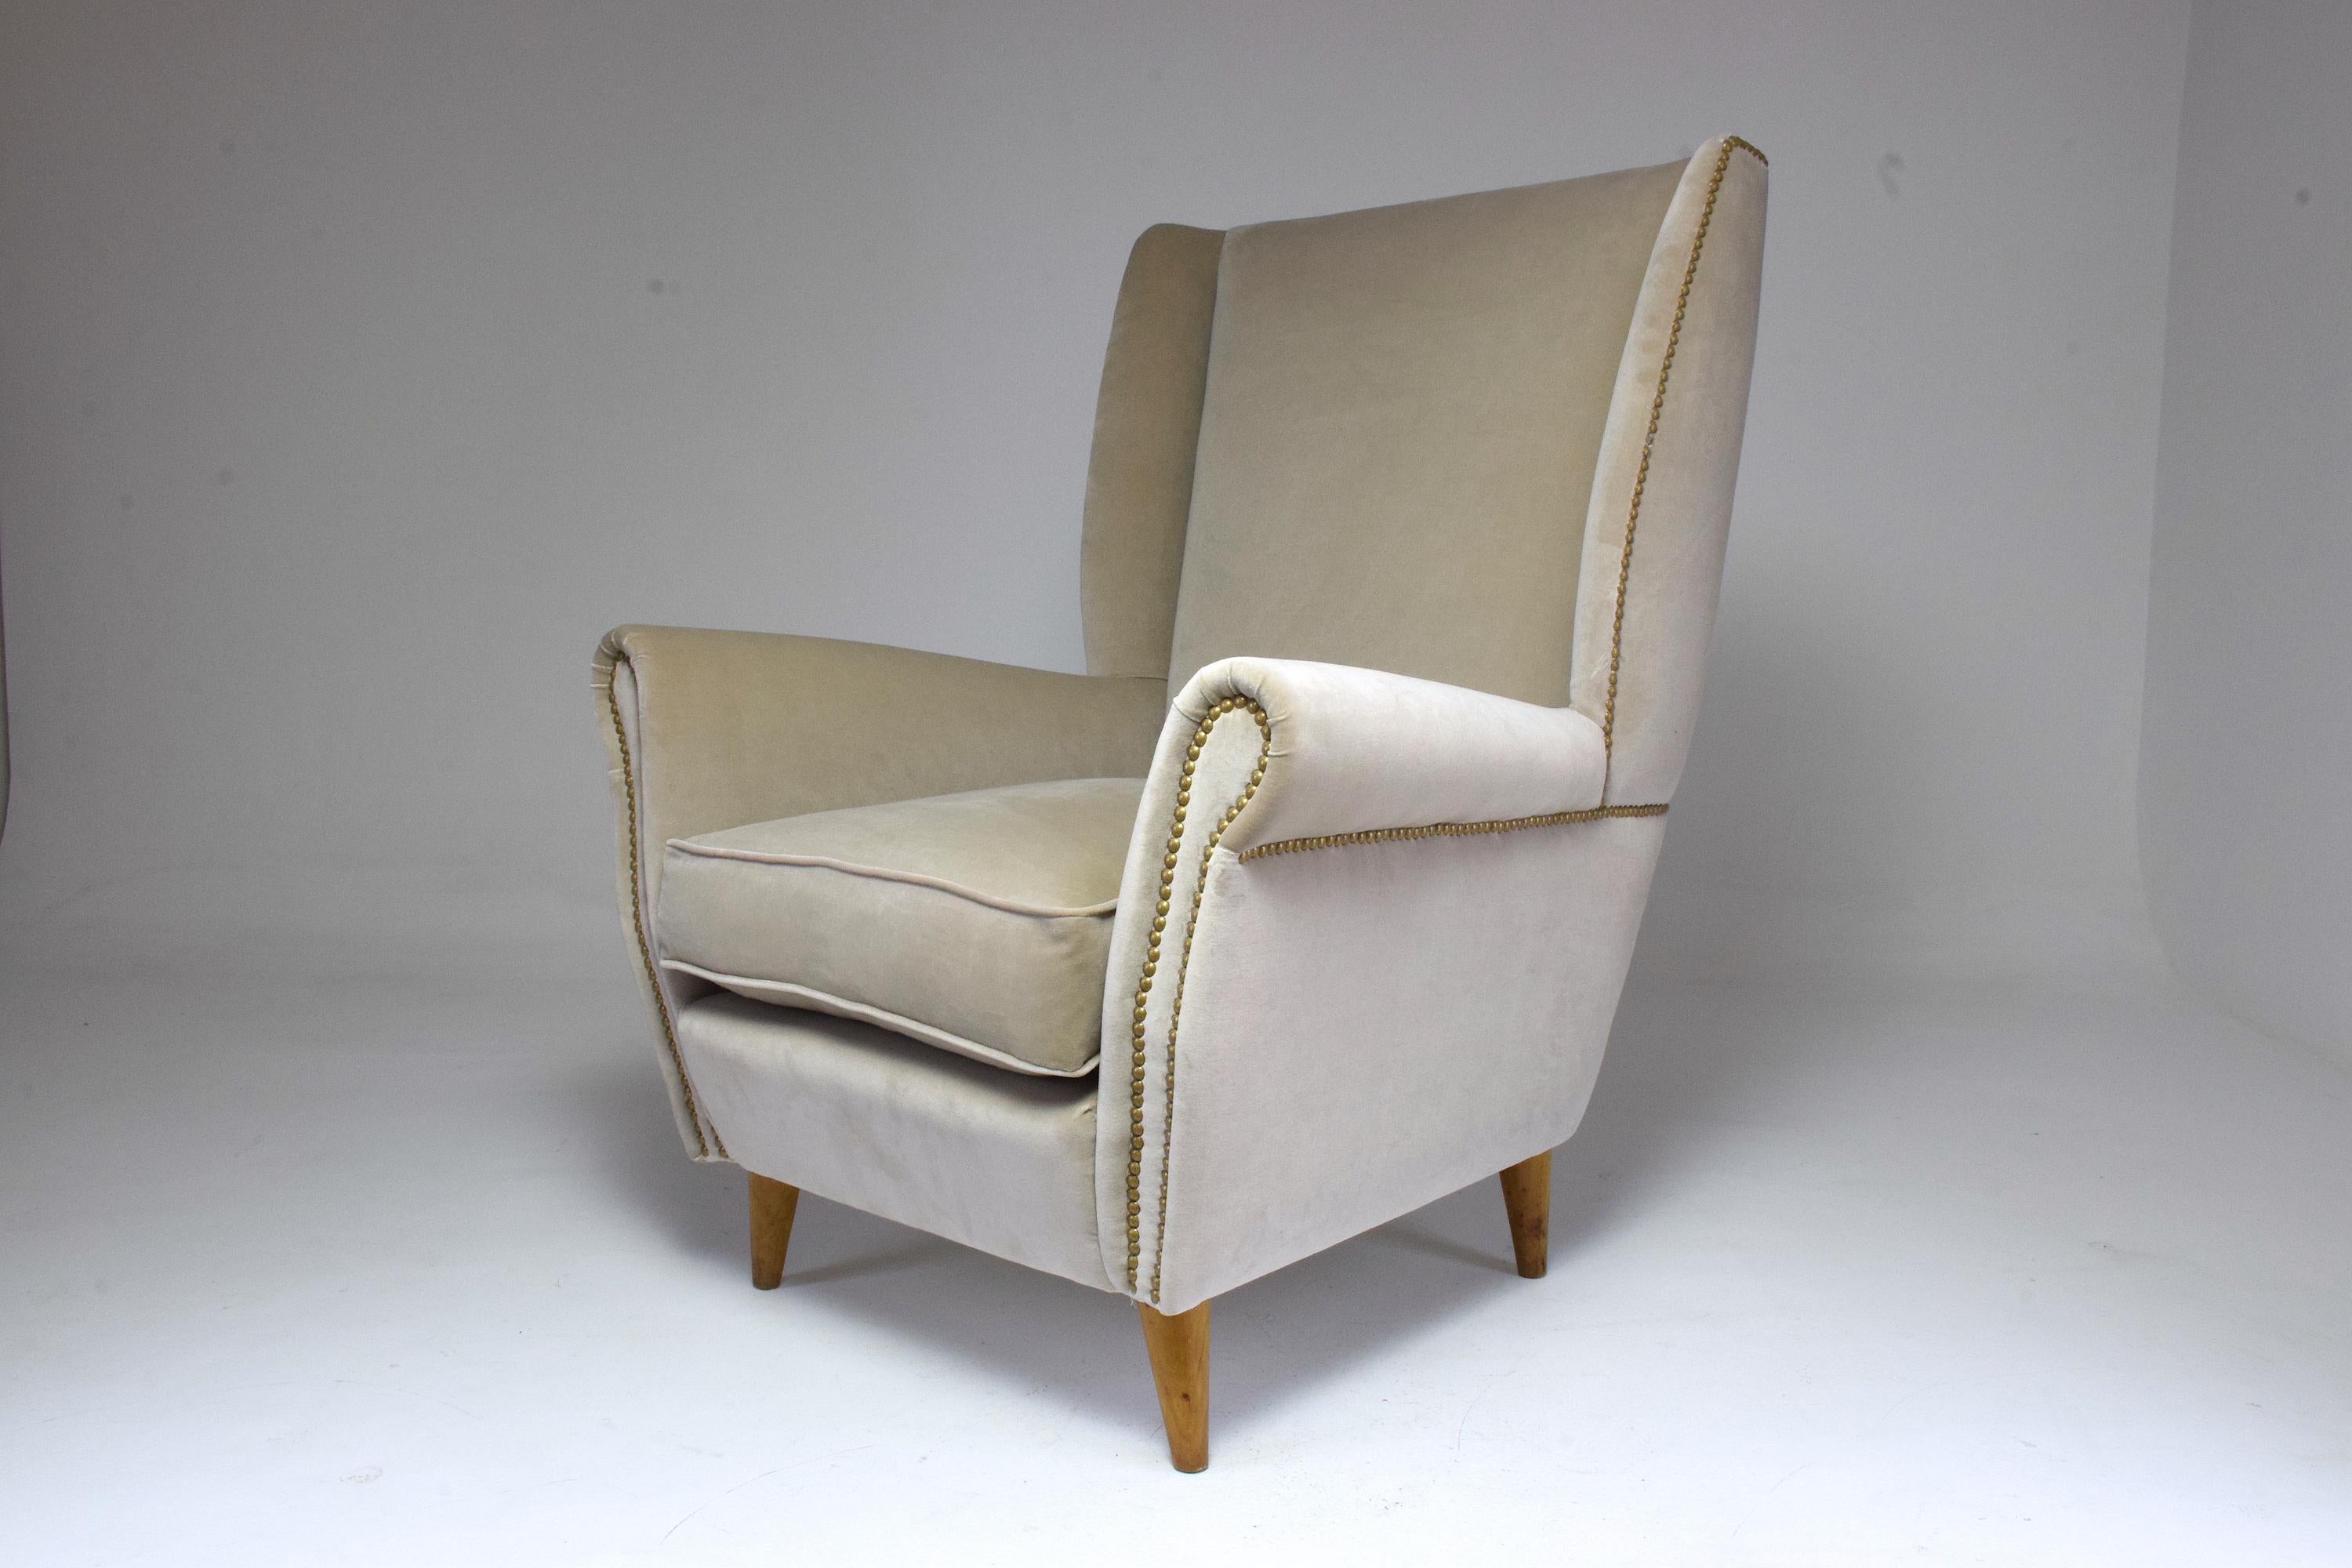 Pair of 20th Century Armchairs by Gio Ponti, 1940s For Sale 2